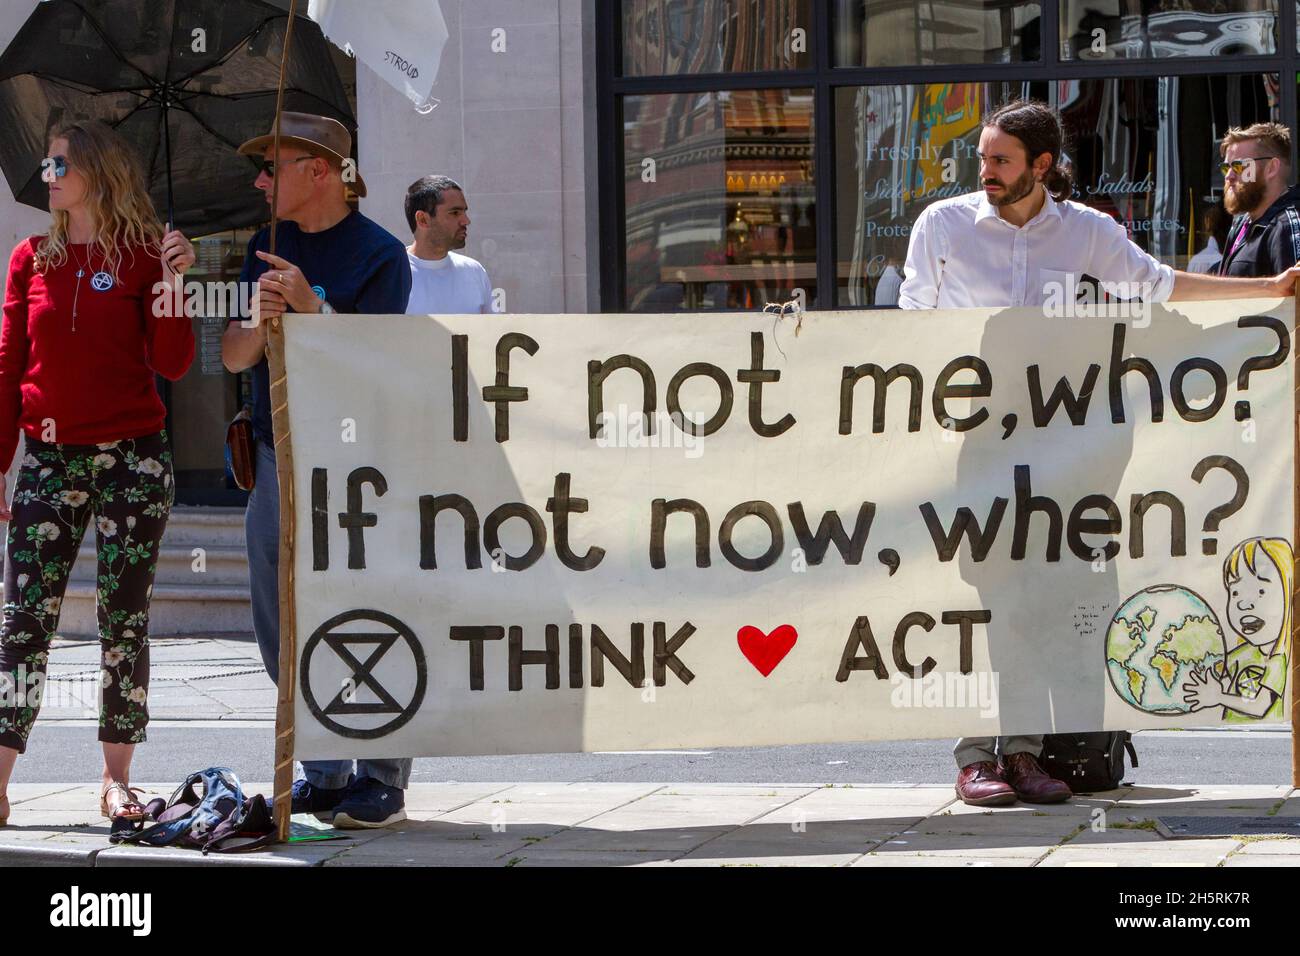 A group of people with banner in climate and environmental demonstration.  Street photography of activists in Extinction Rebellion protest. Stock Photo